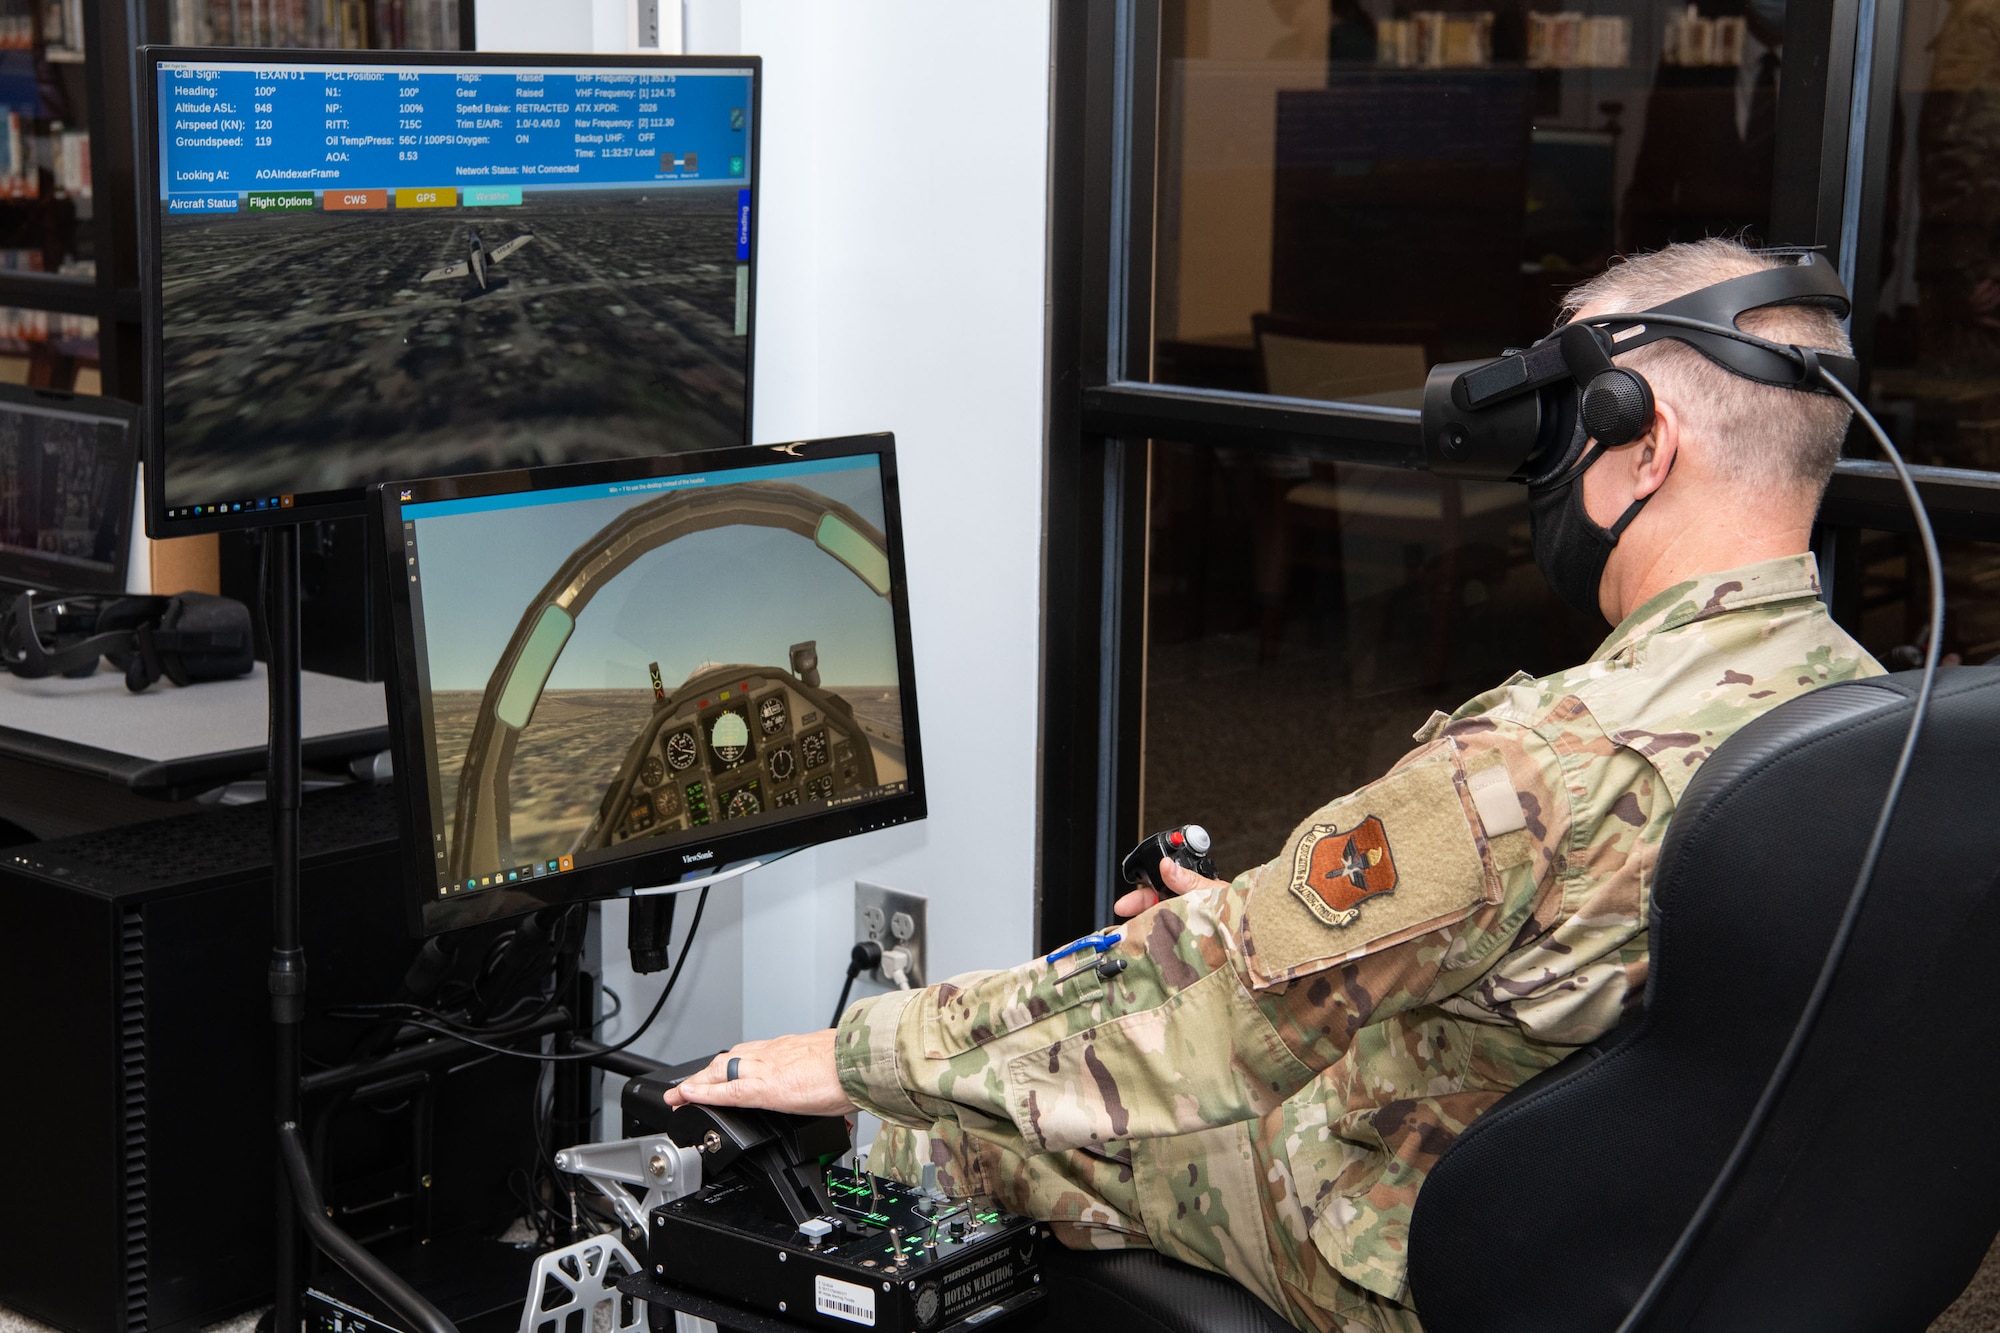 Maxwell AFB, Ala. - Air University Library and Immersive Learning and Simulation Research Task Force host a ribbon cutting for the new Pilot Training NEXT simulator October 28th 2021 in the Library’s Inovation Lab. (U.S. Air Force photo by William Birchfield)